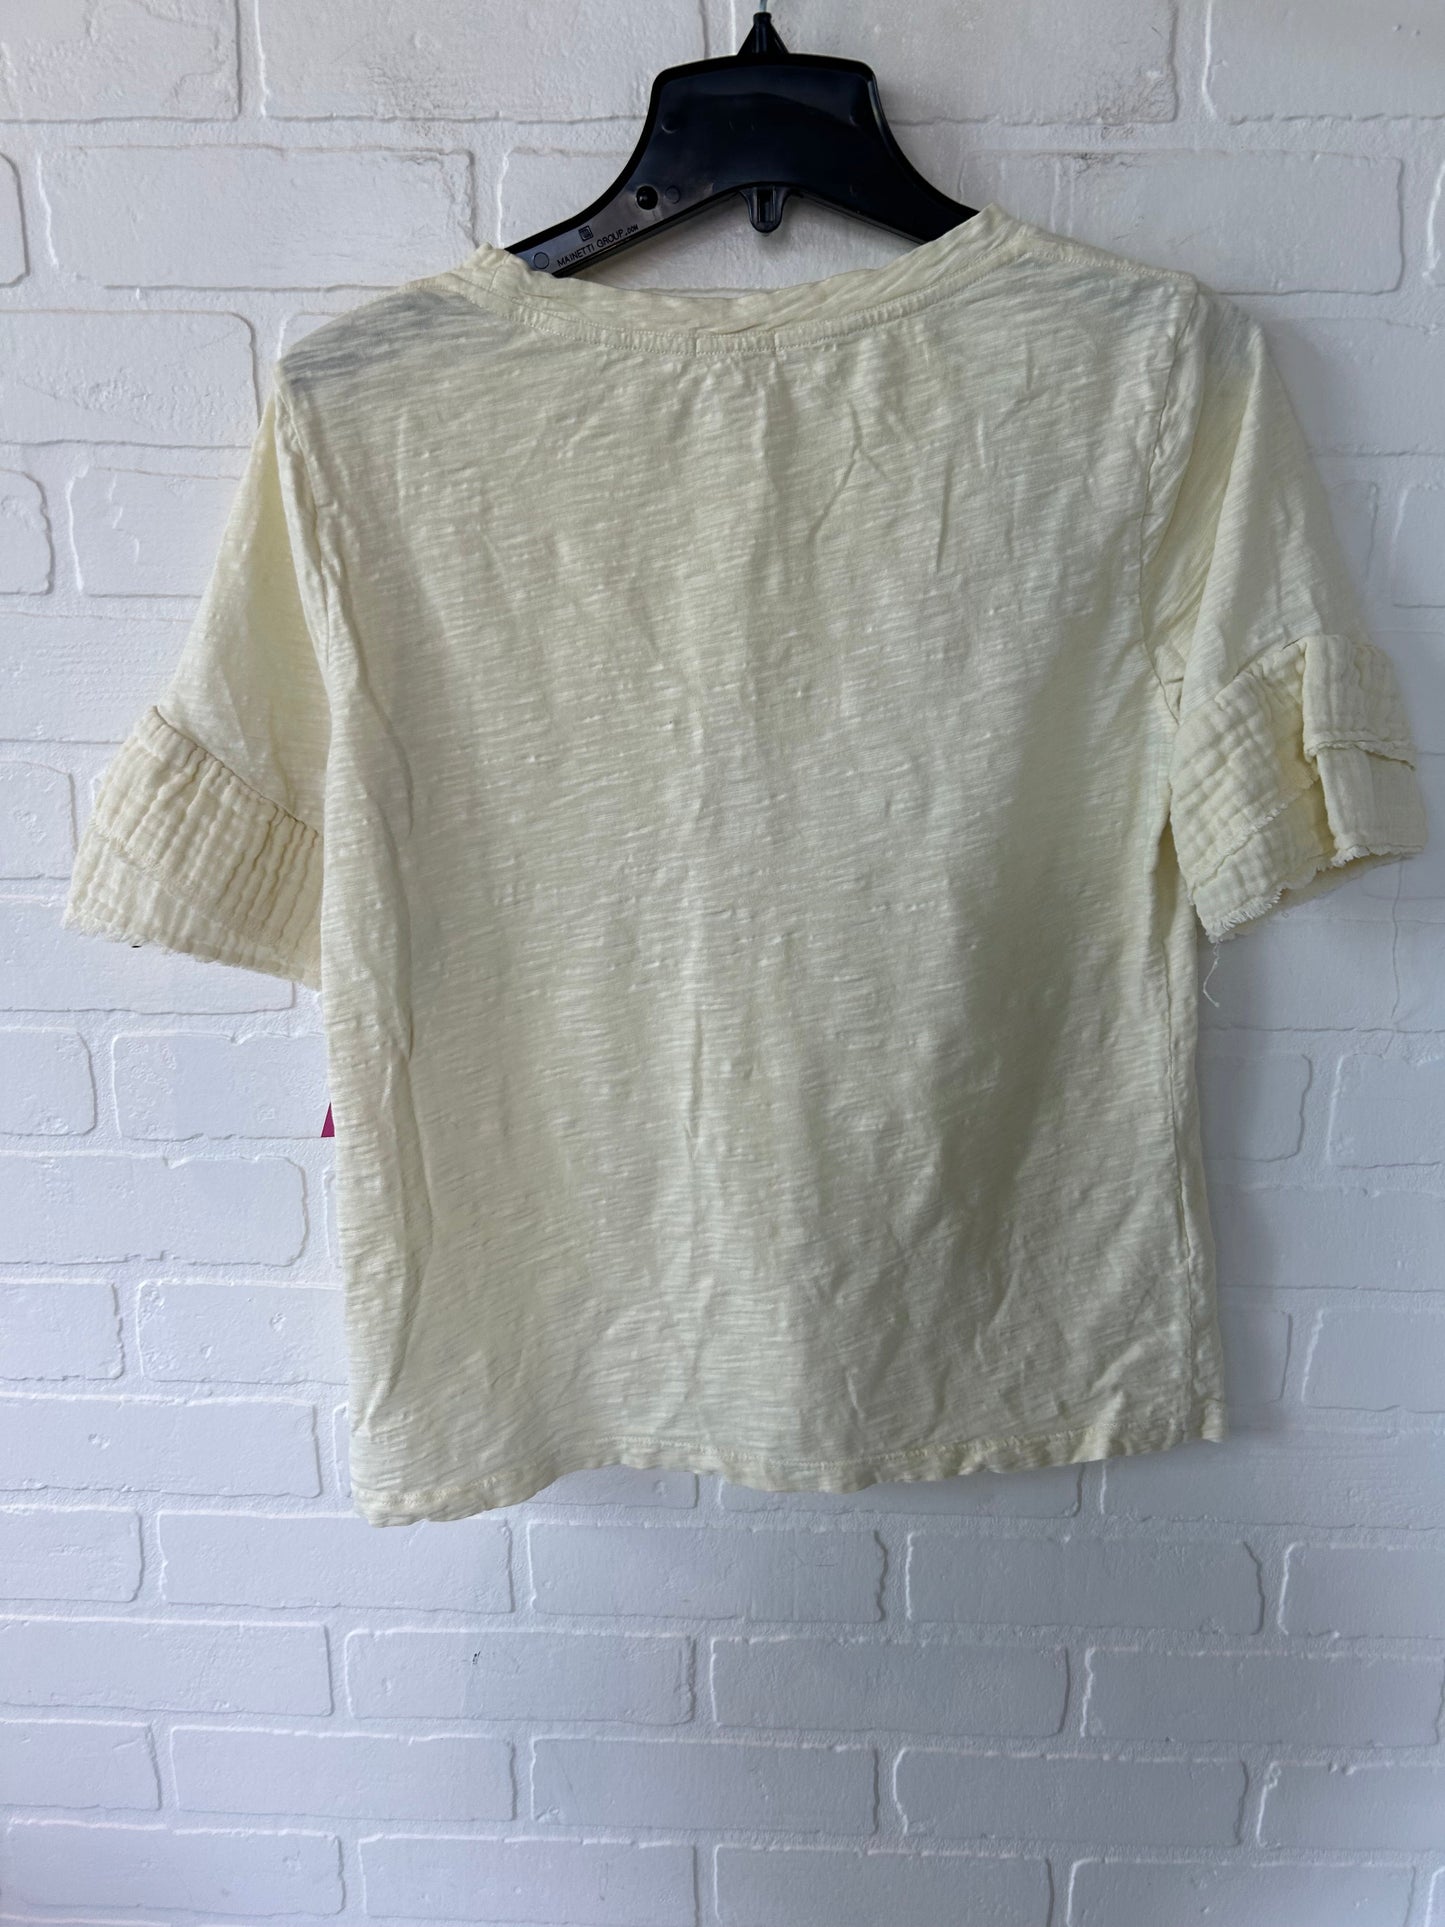 Yellow Top Short Sleeve Dylan, Size S